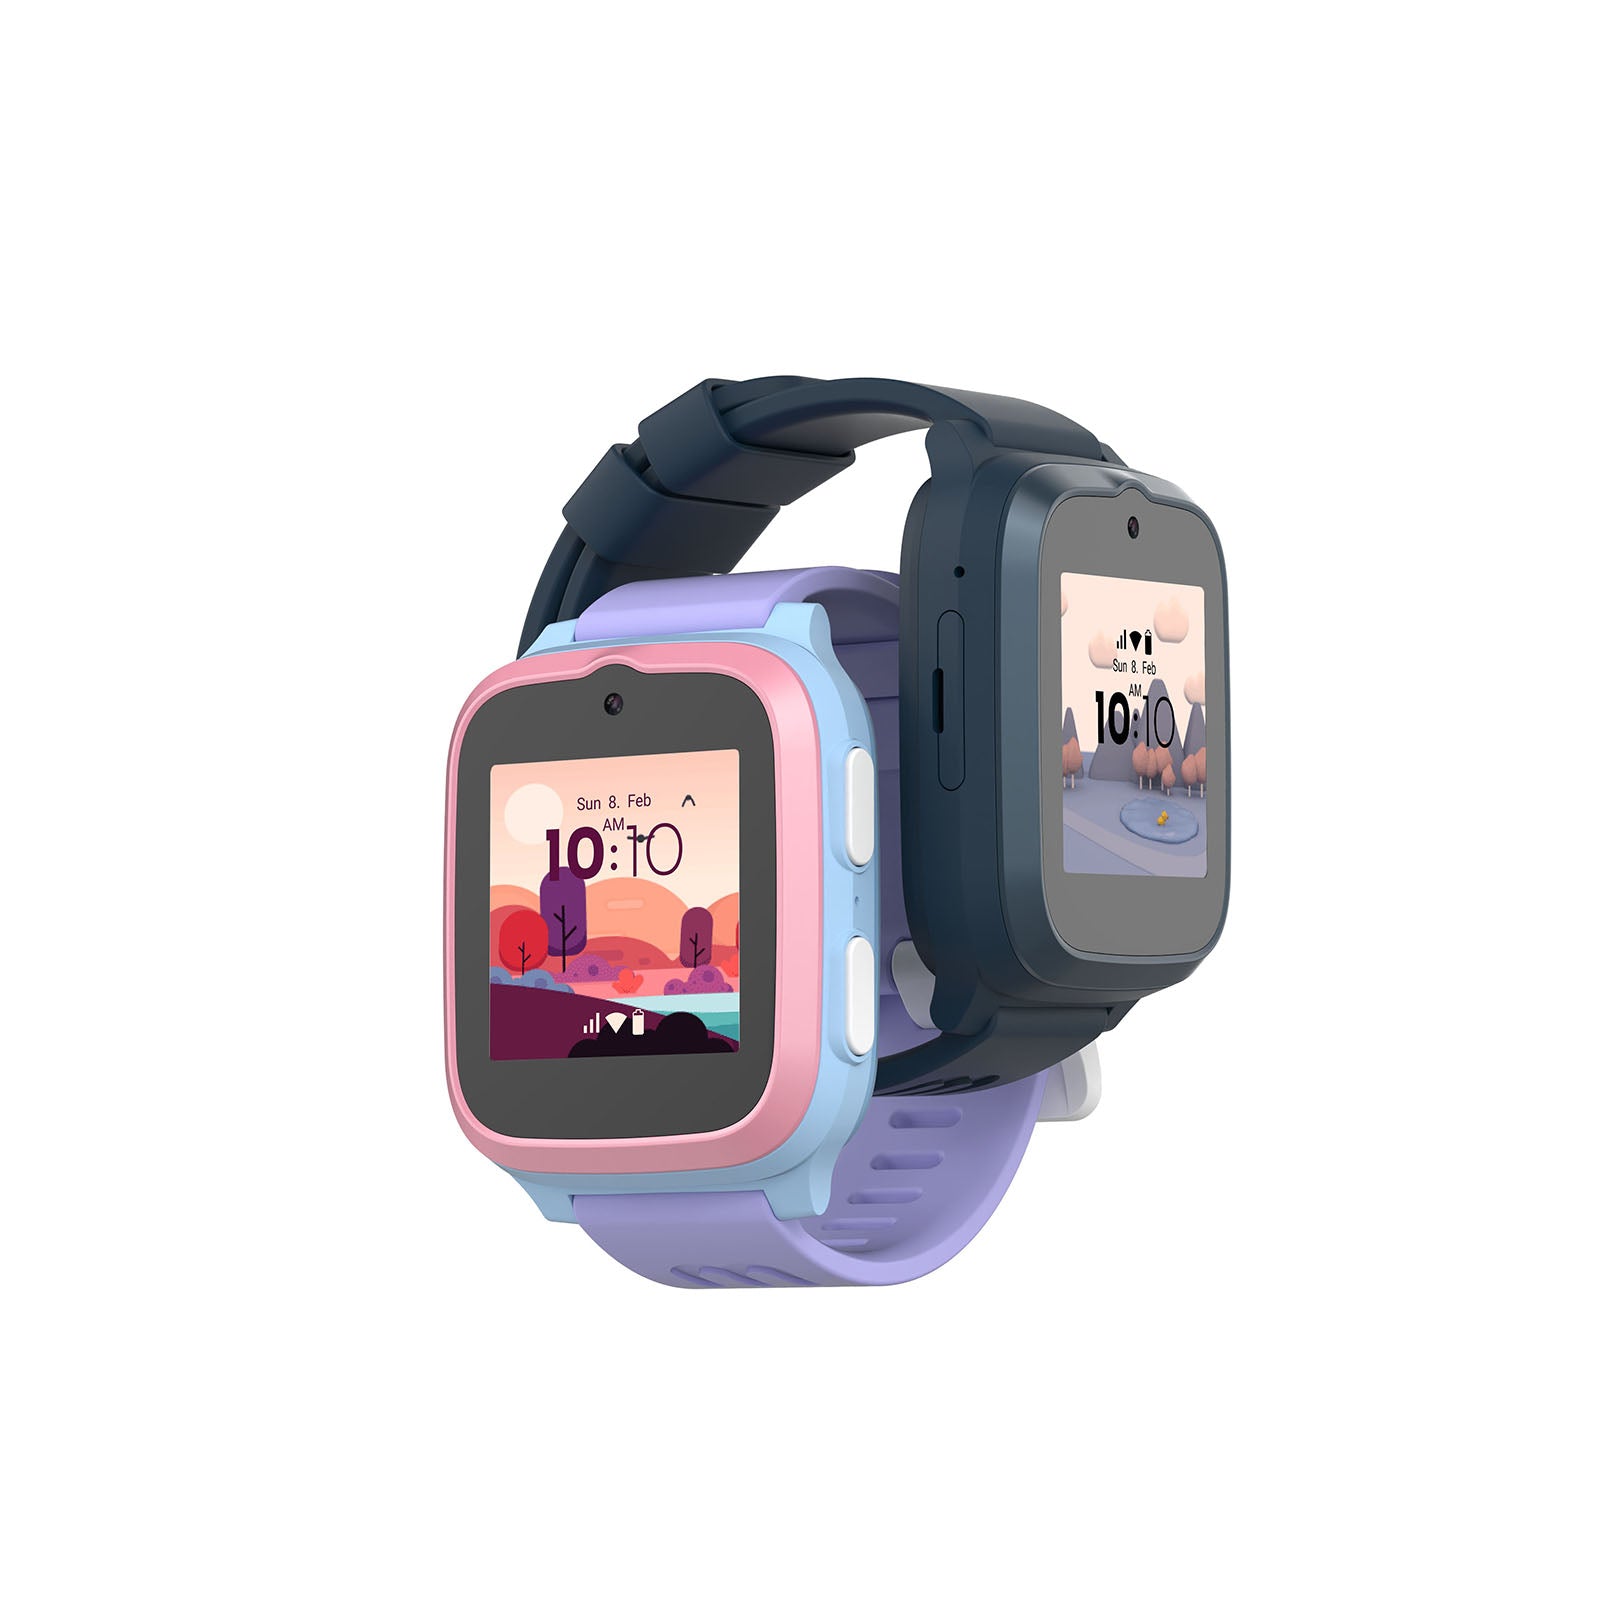 myFirst Fone S3 4G Music Smartwatch phone with GPS